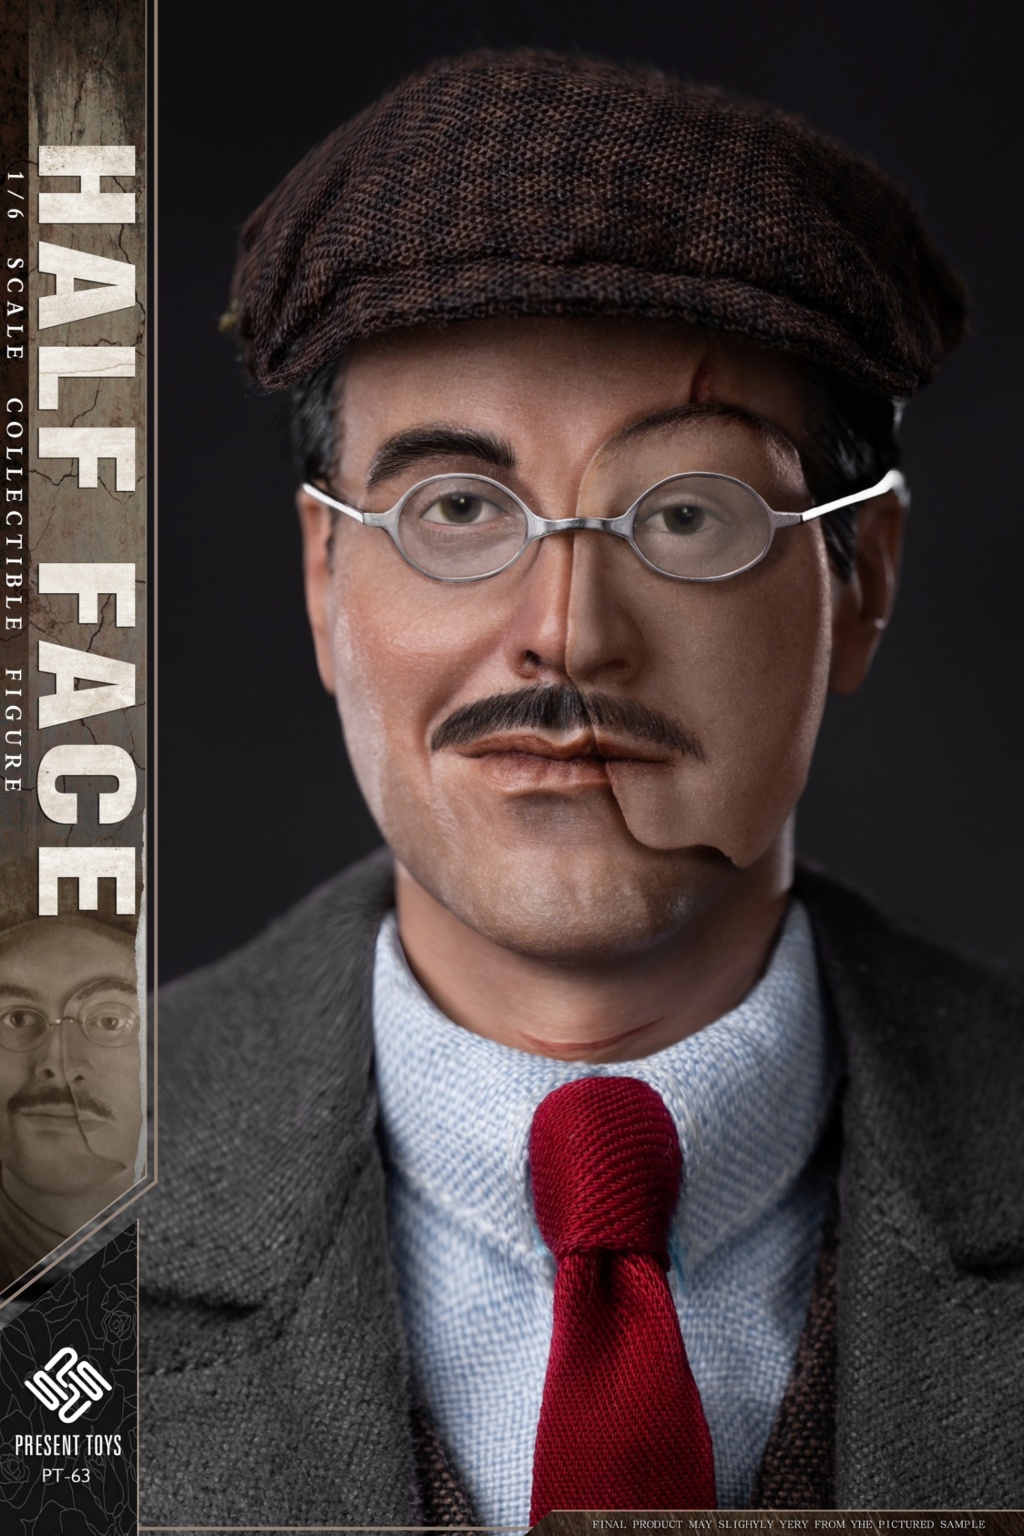 Cable-Based - NEW PRODUCT: PRESENT TOYS  1:6 collectiblefigure – Half Face. 19265611